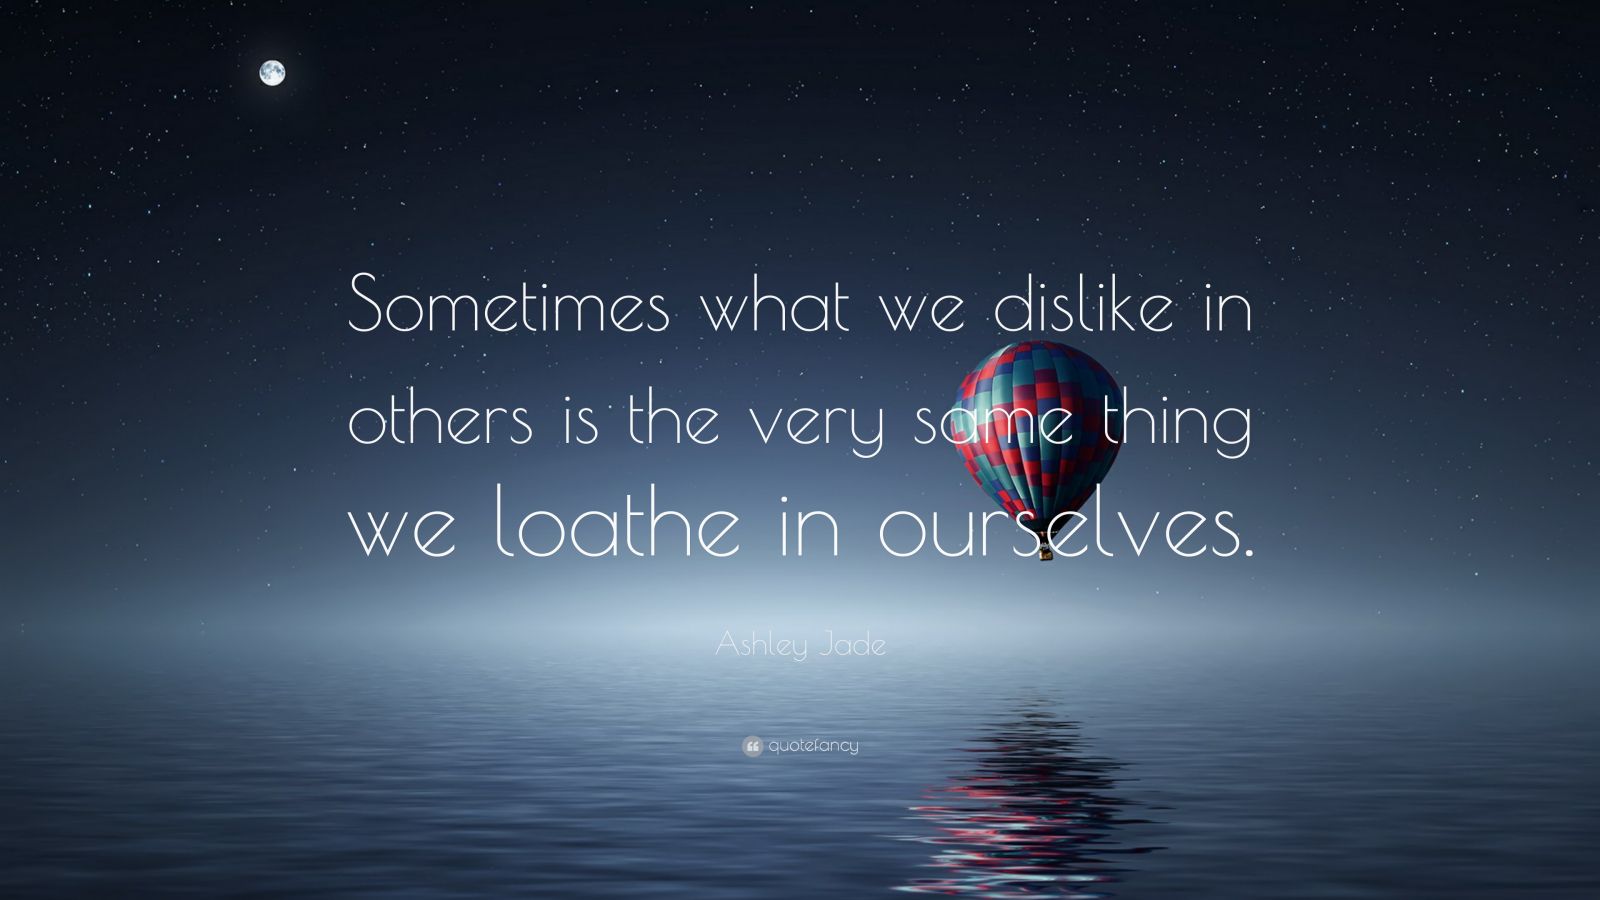 Ashley Jade Quote “sometimes What We Dislike In Others Is The Very Same Thing We Loathe In